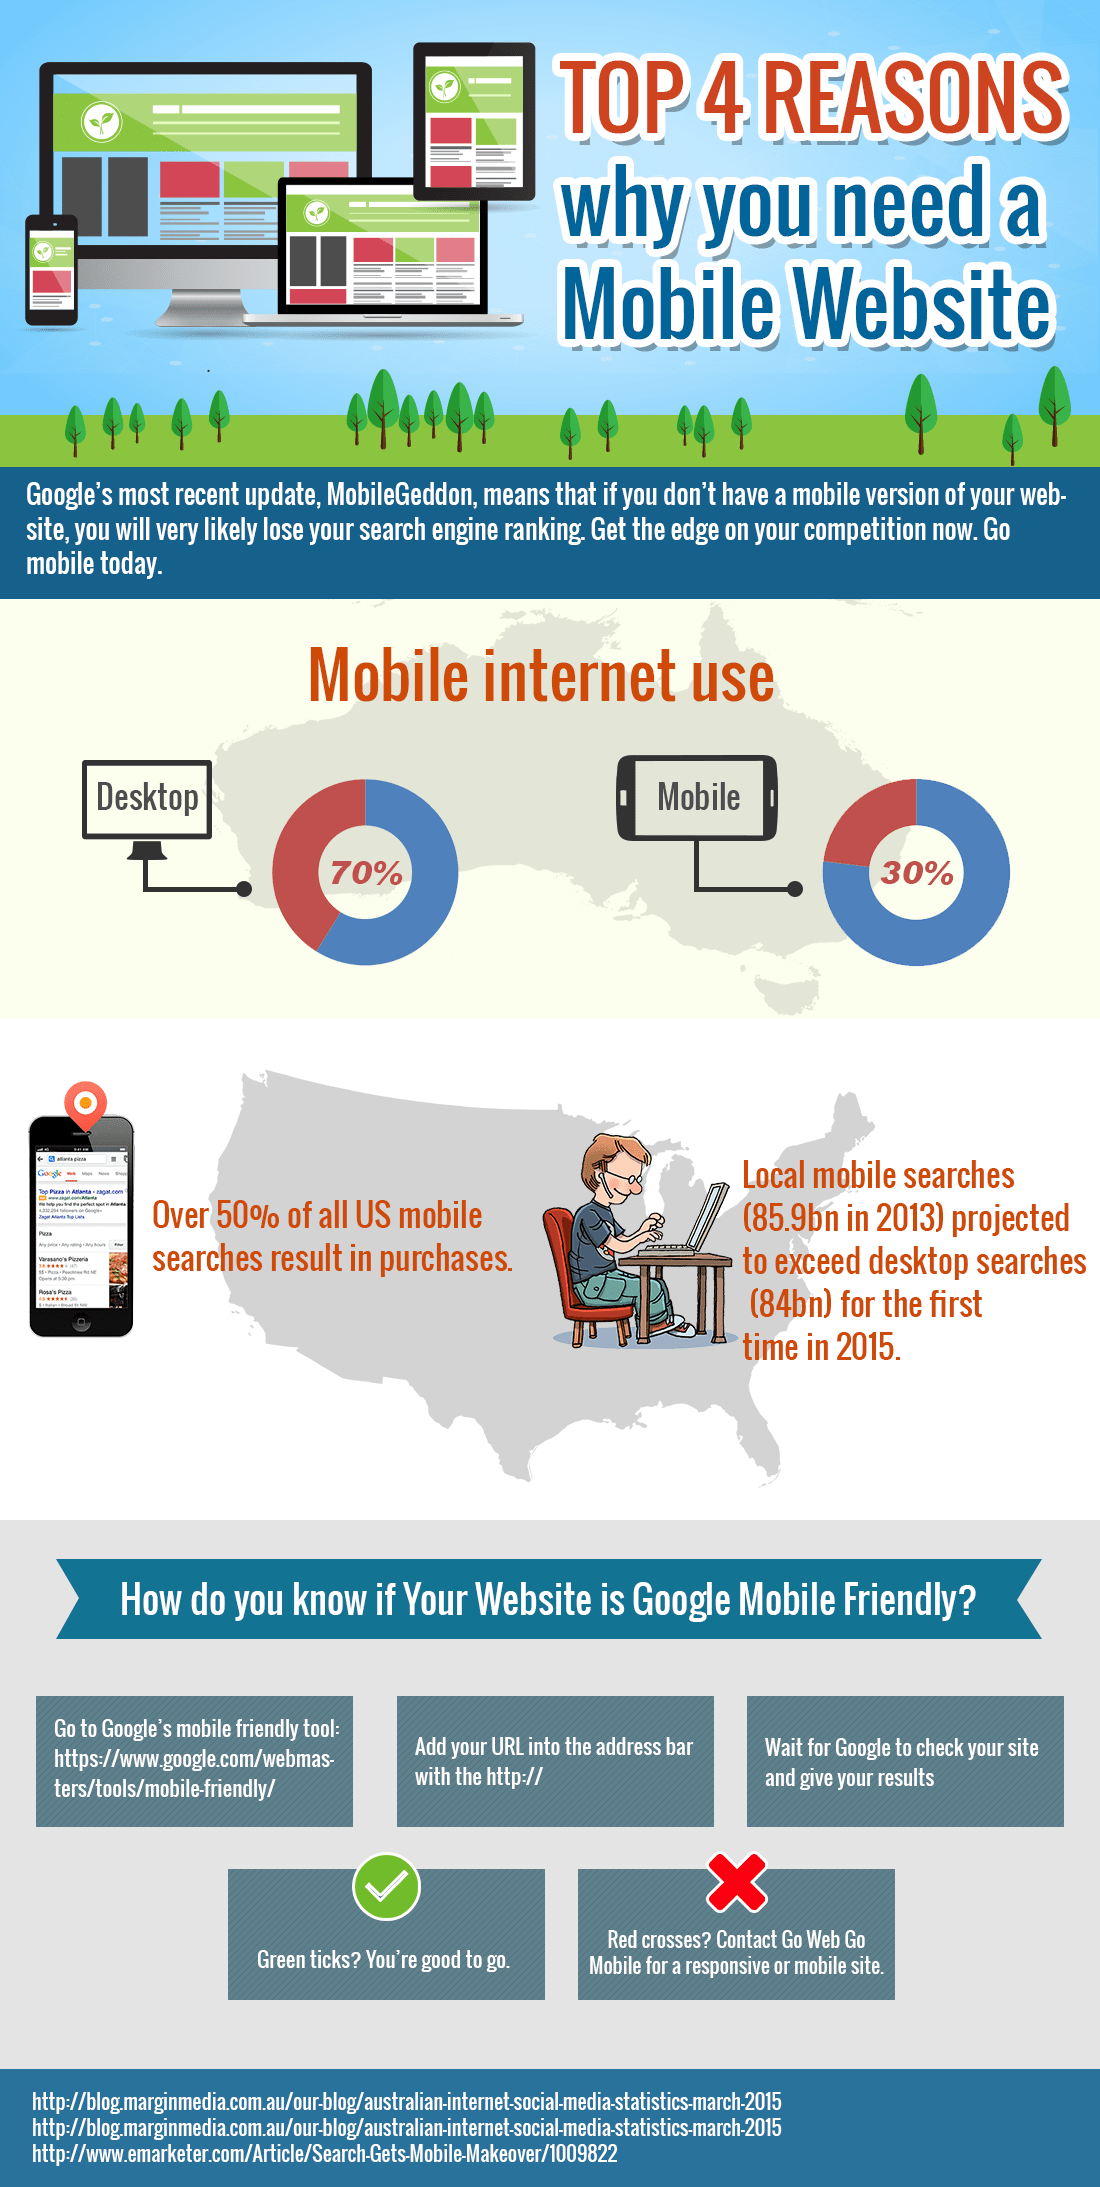 mobilegeddon-why-you-need-mobile-site